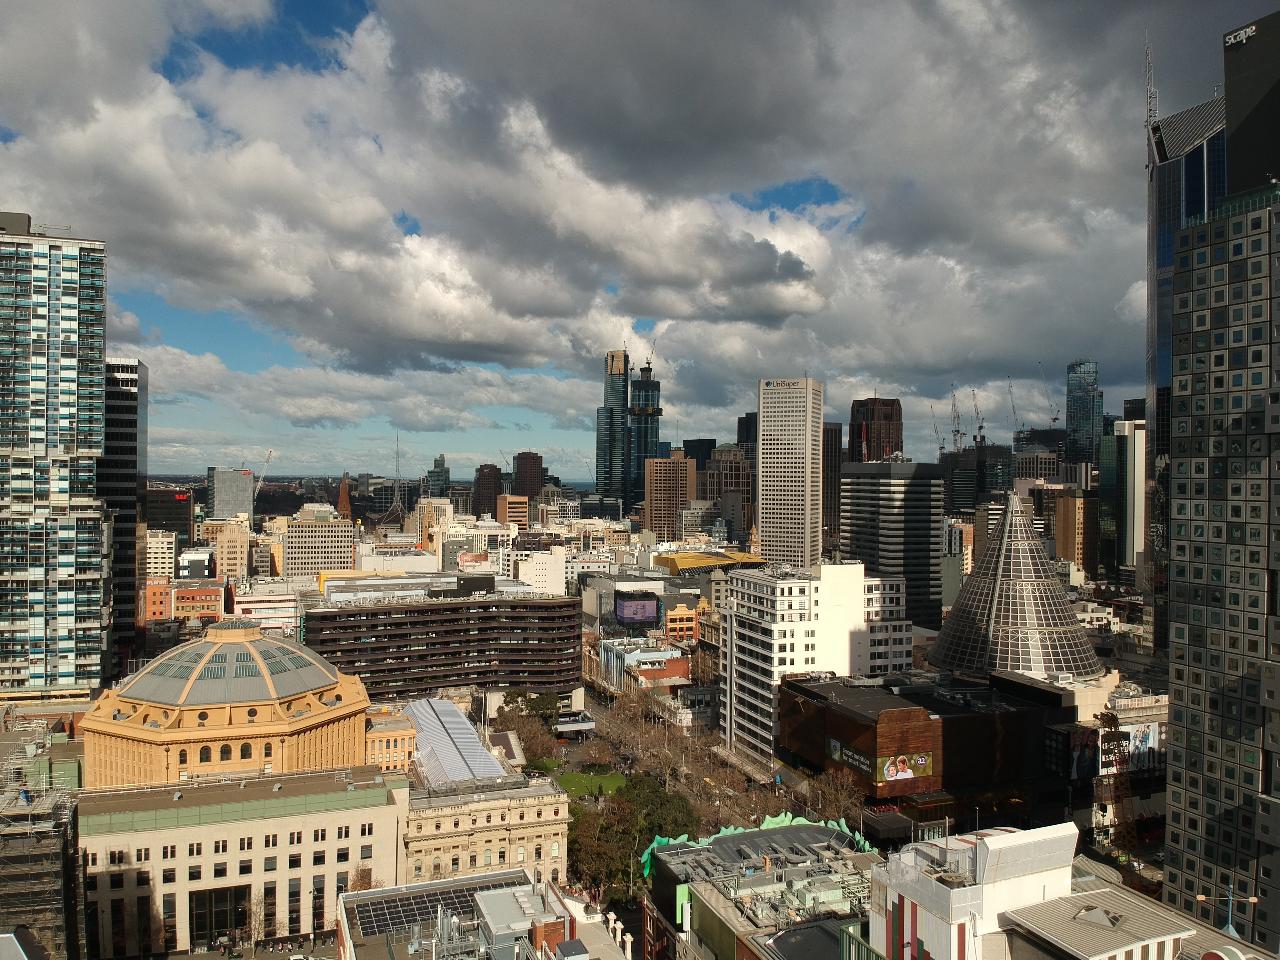 Bunjil Place and City of Melbourne